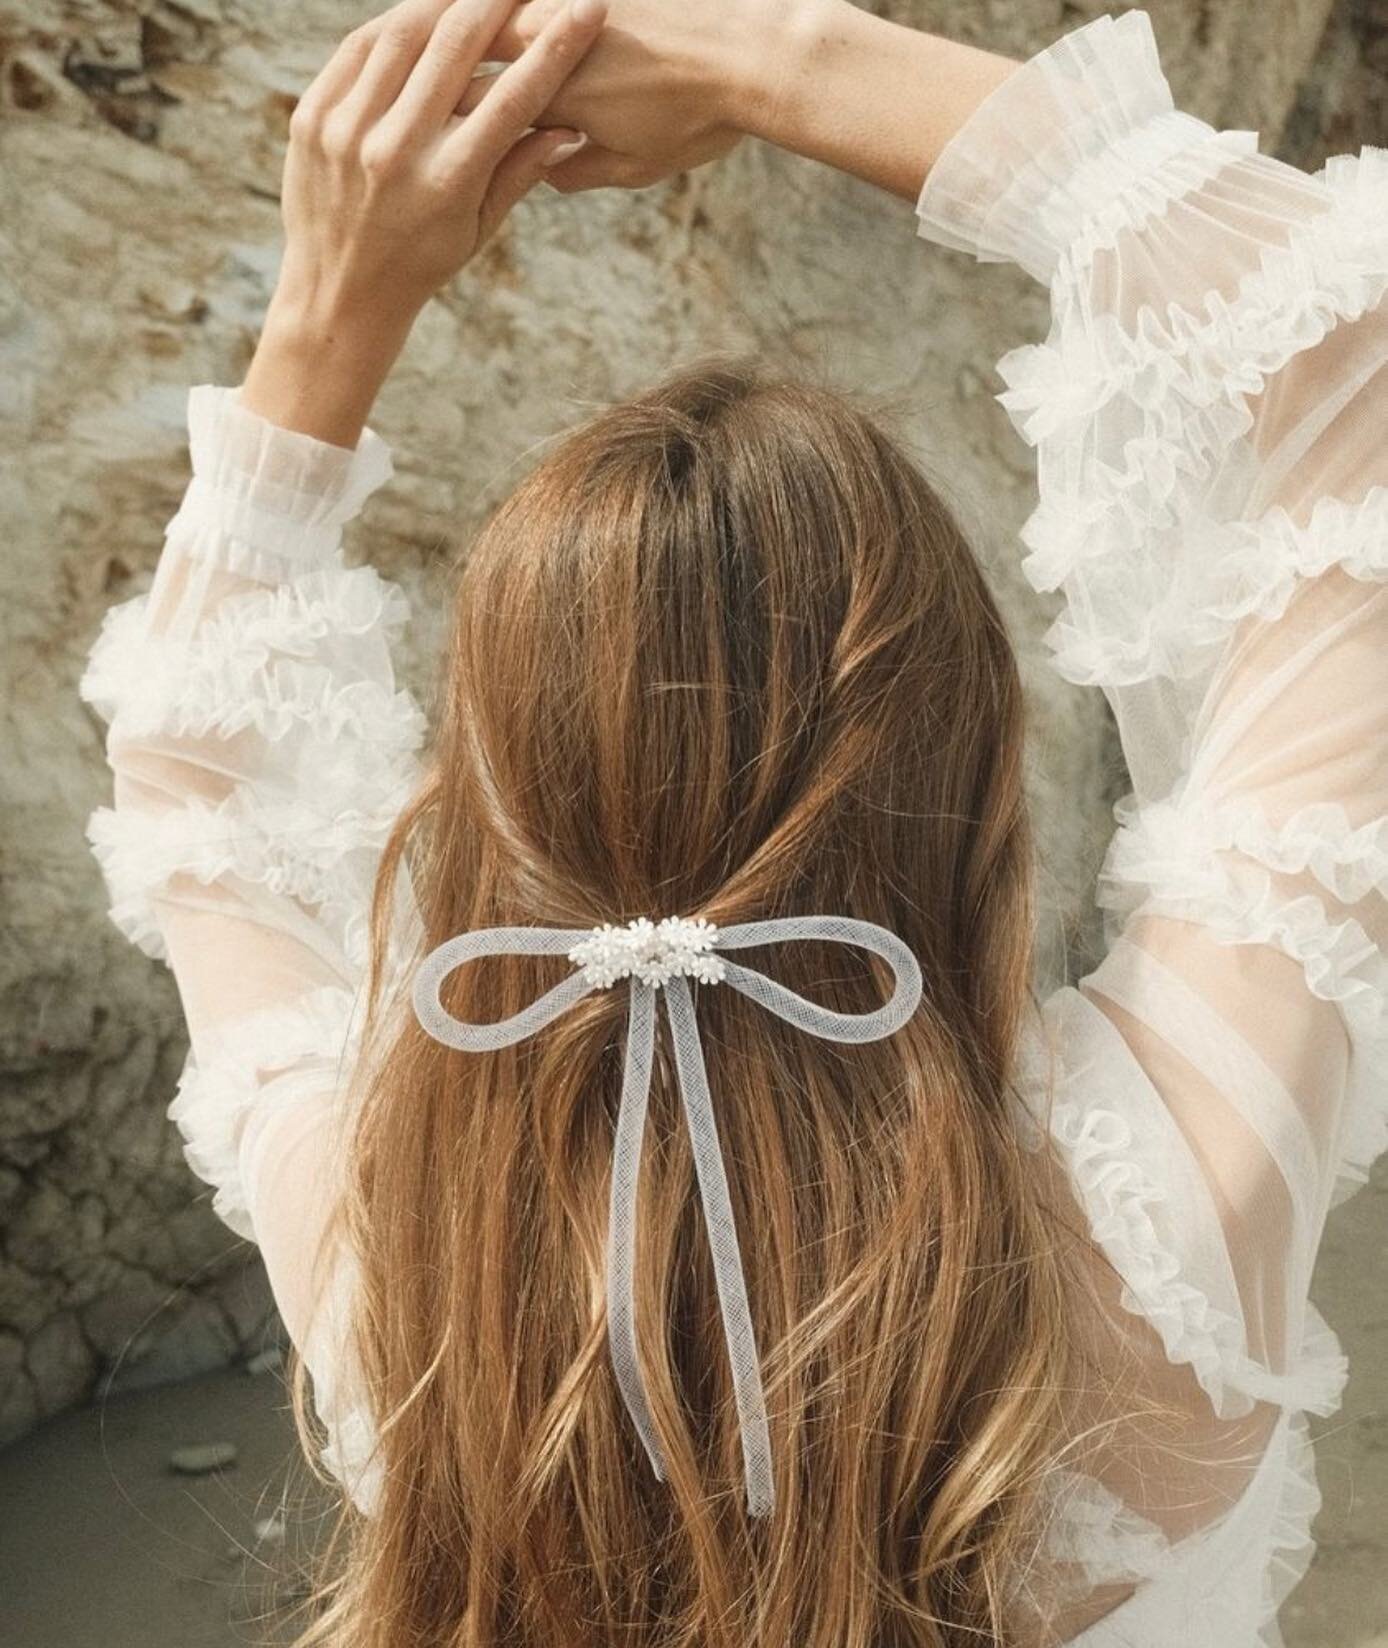 A little bow goes a long way🎀